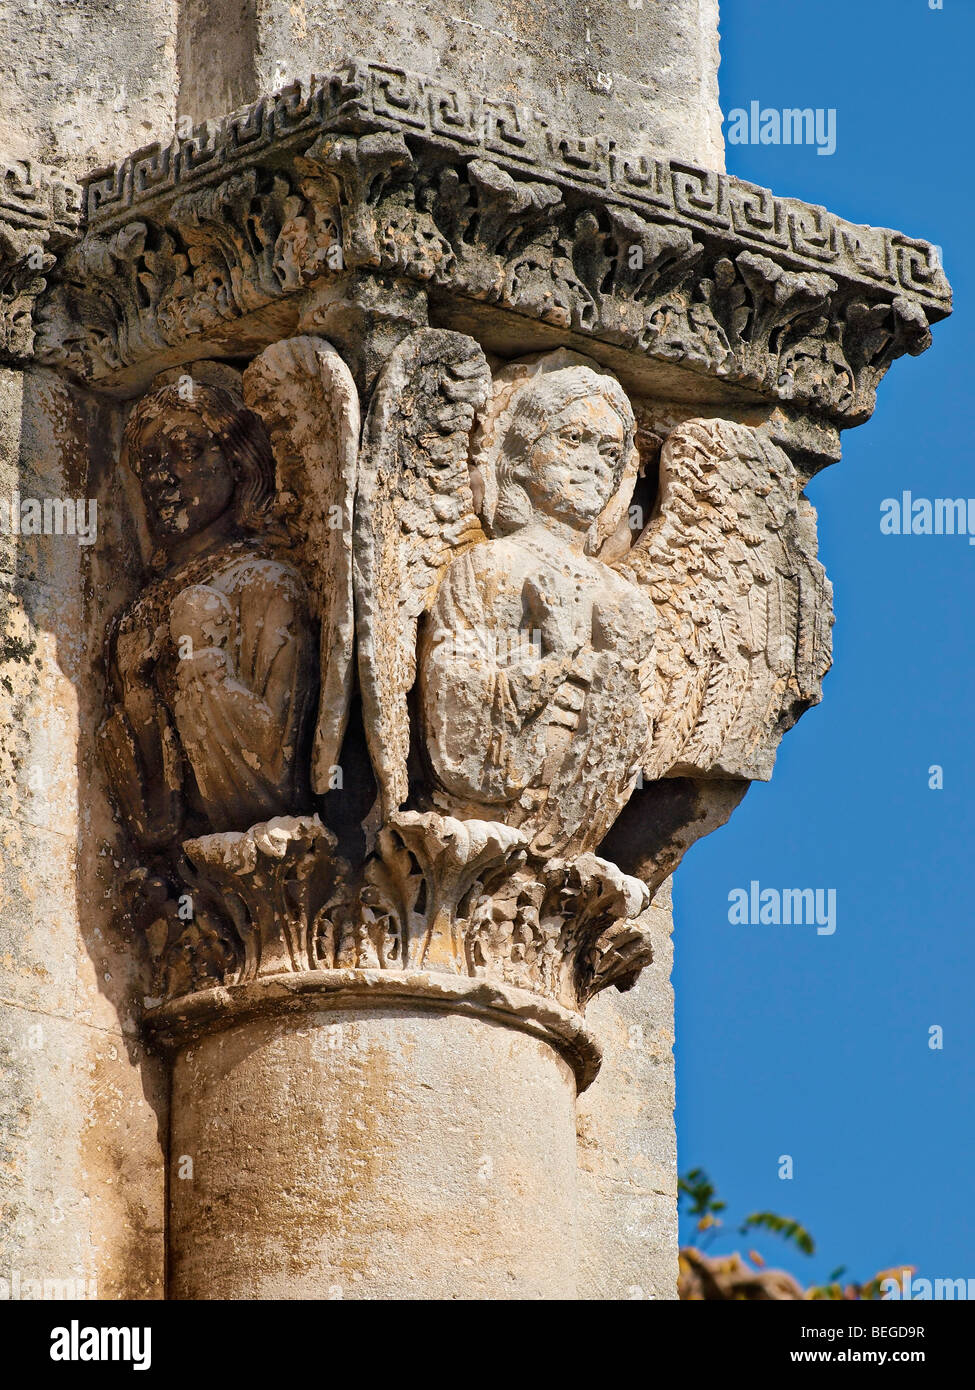 The Saint Gilles monastory and abbey, France. Stock Photo